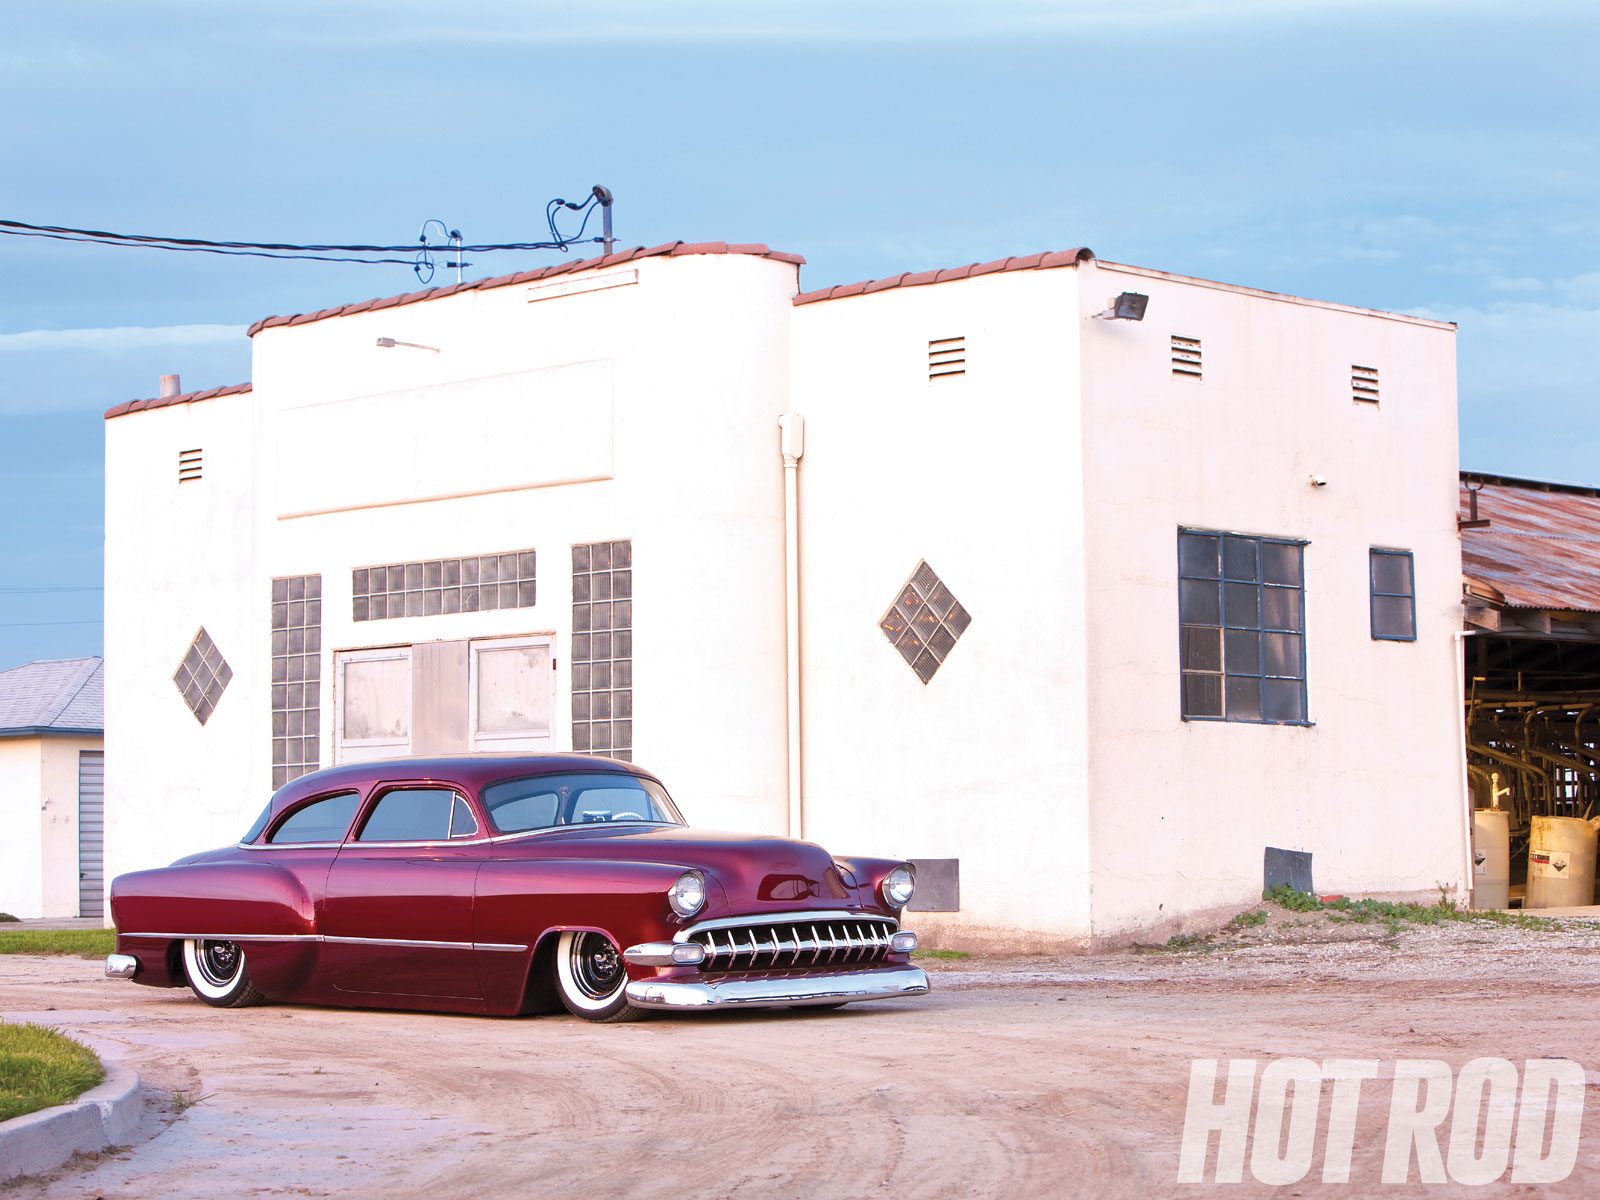 hrdp-1006-05-o-1954-chevy-custom-coupe-infront-of-an-old-dairy.jpg